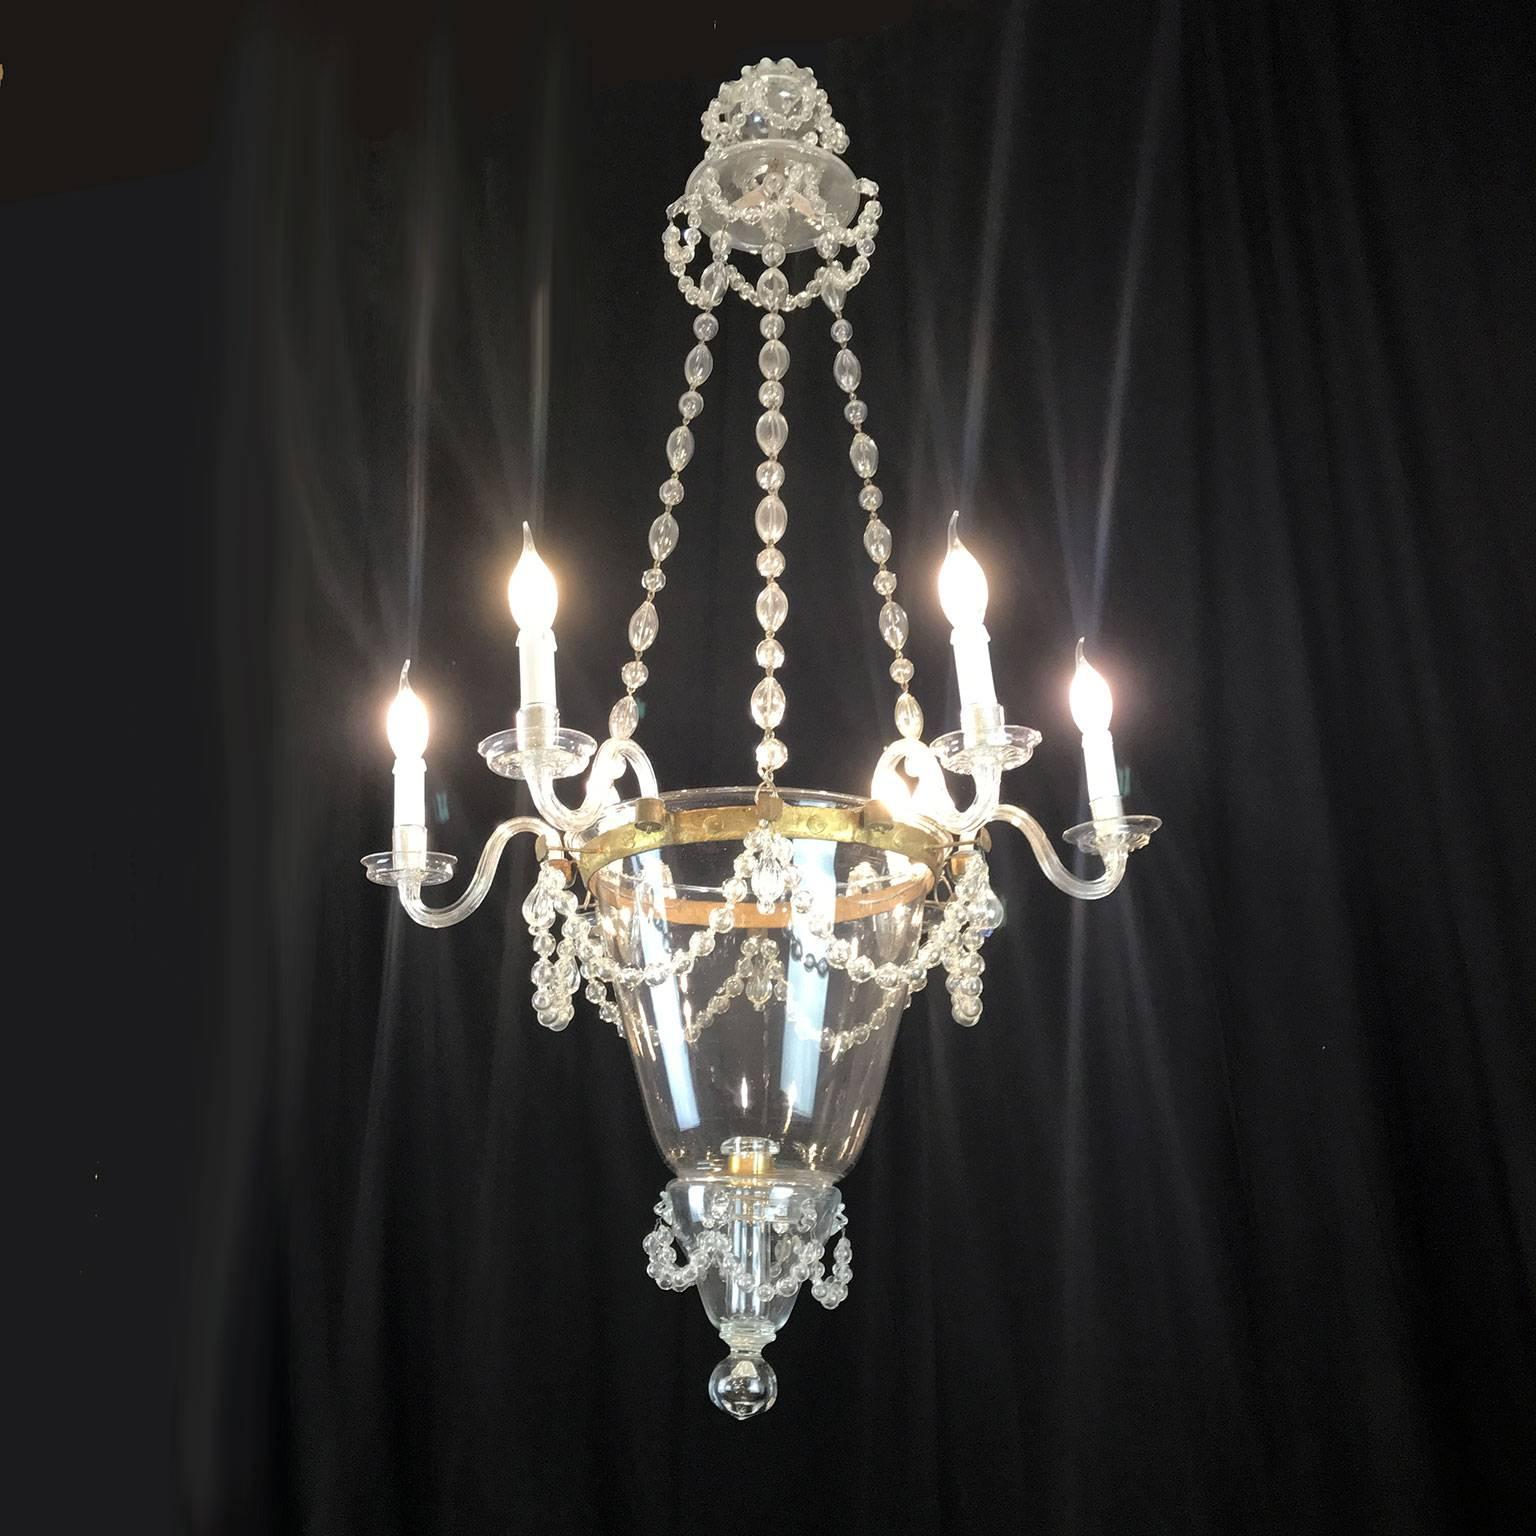 19th century Venetian Murano glass six-light chandelier, an antique clear blown glass chandelier with unconventional structure consisting of a circular gilt iron crown holding six curved arms and three oval blown glass beads chains.

Those chains